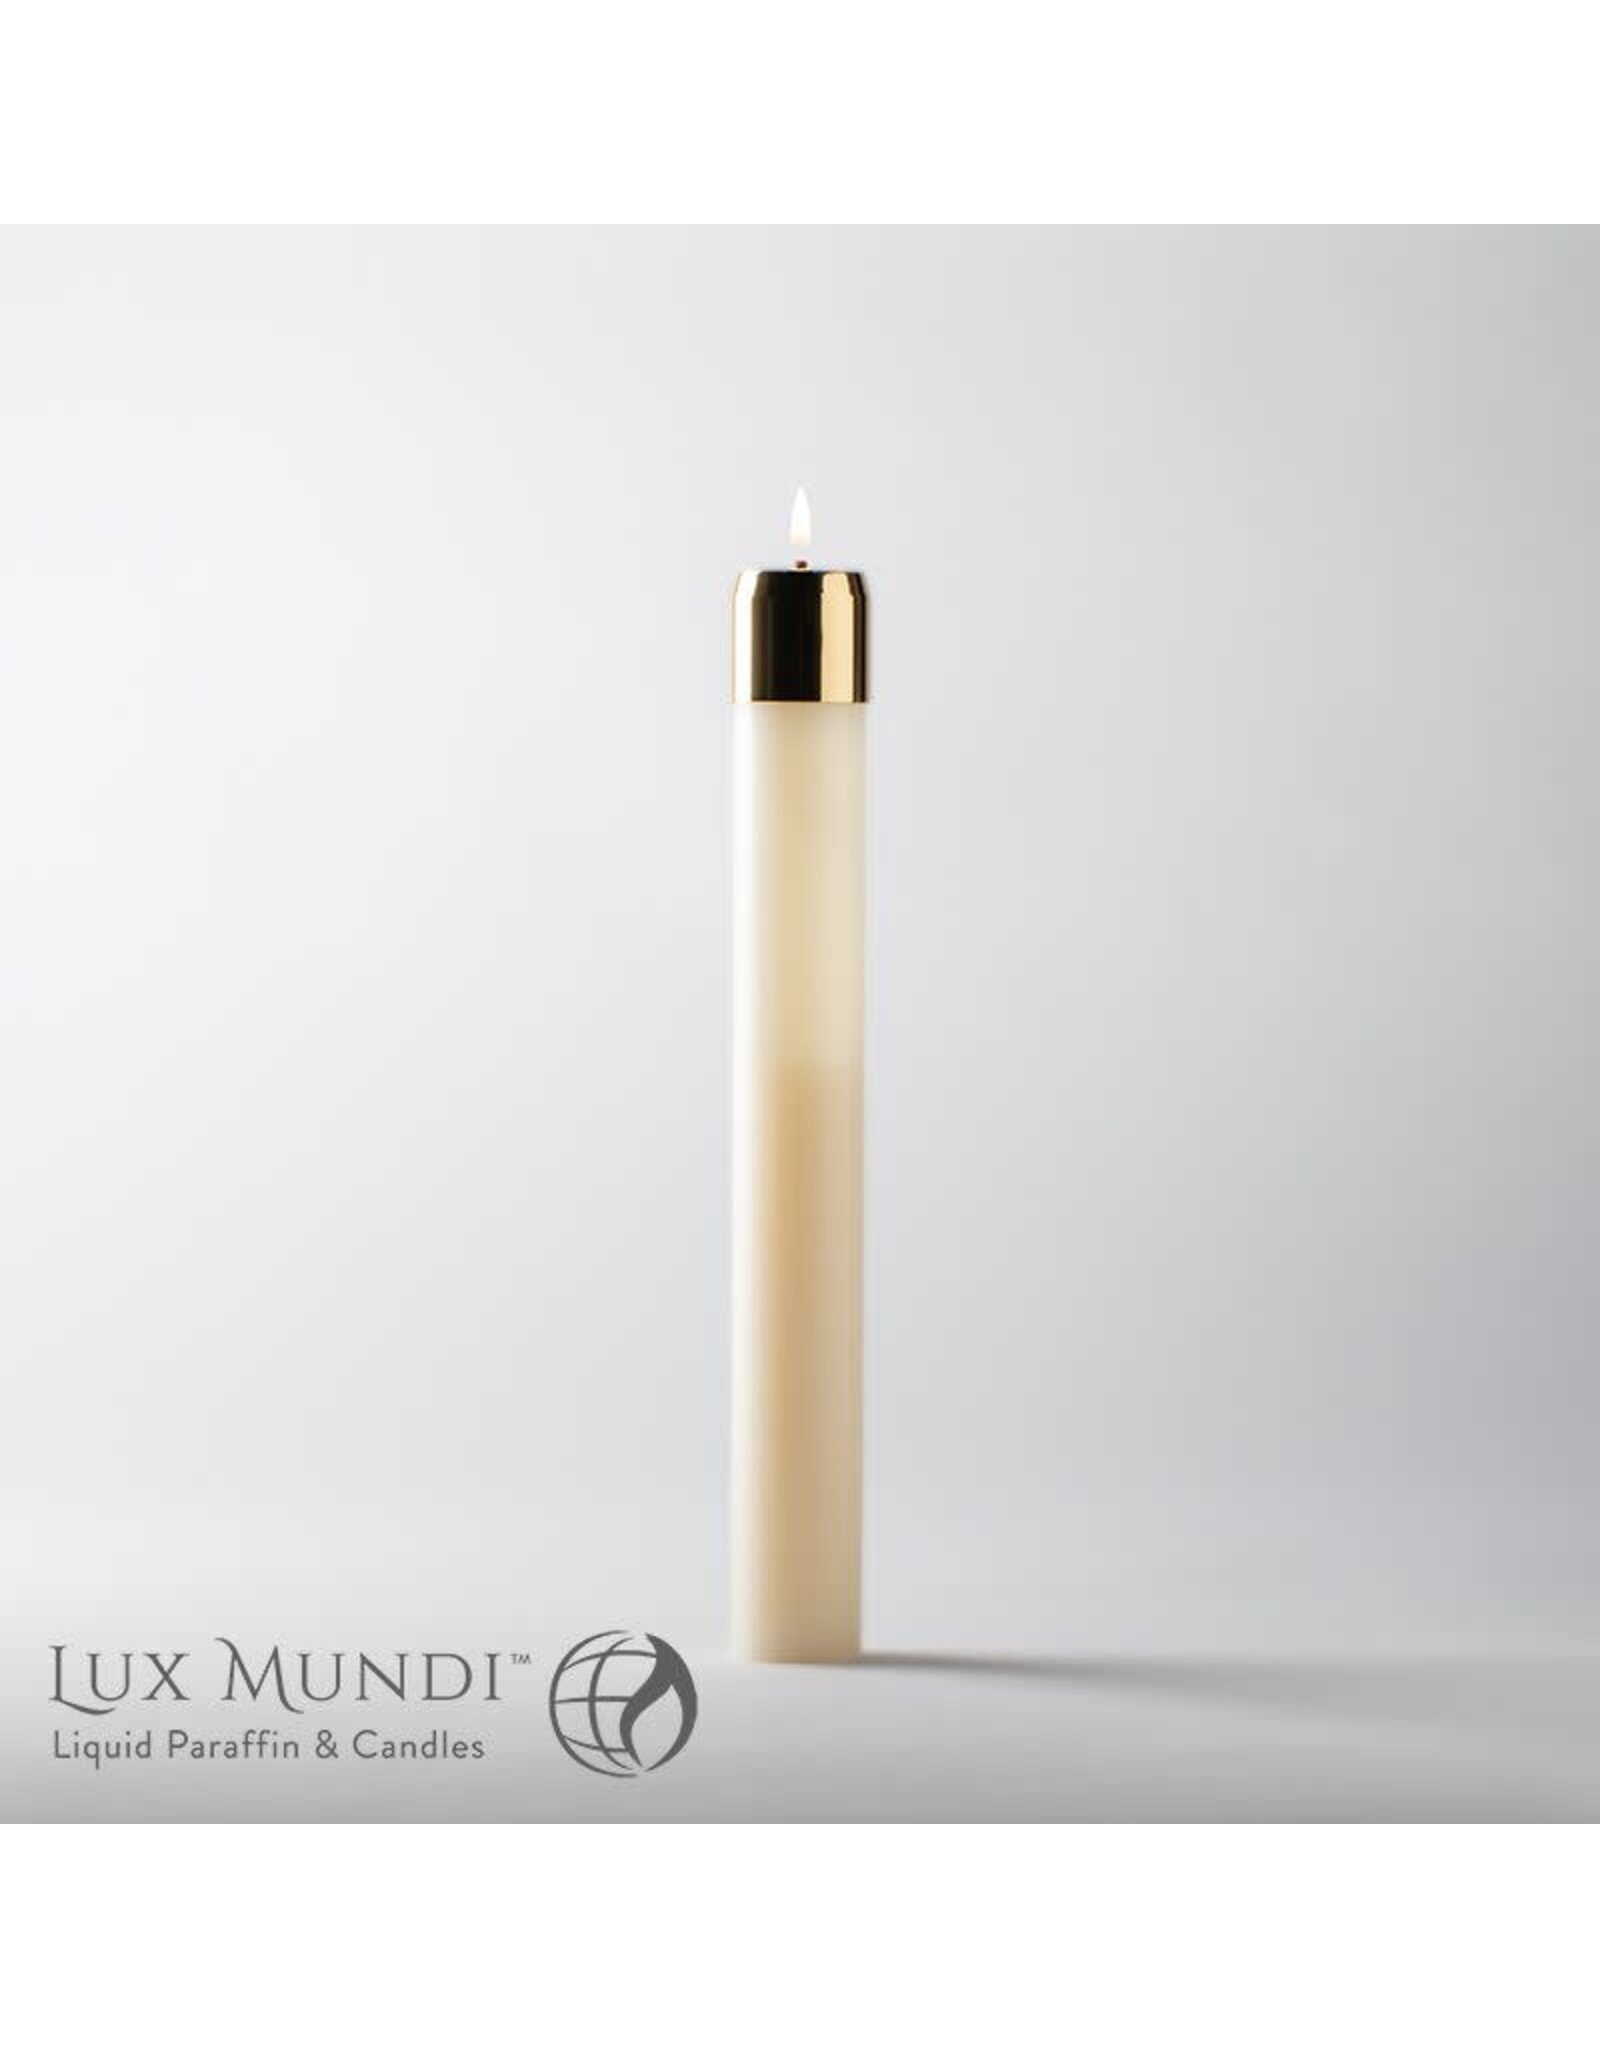 Lux Mundi Refillable Oil Altar Candle 3"x9"